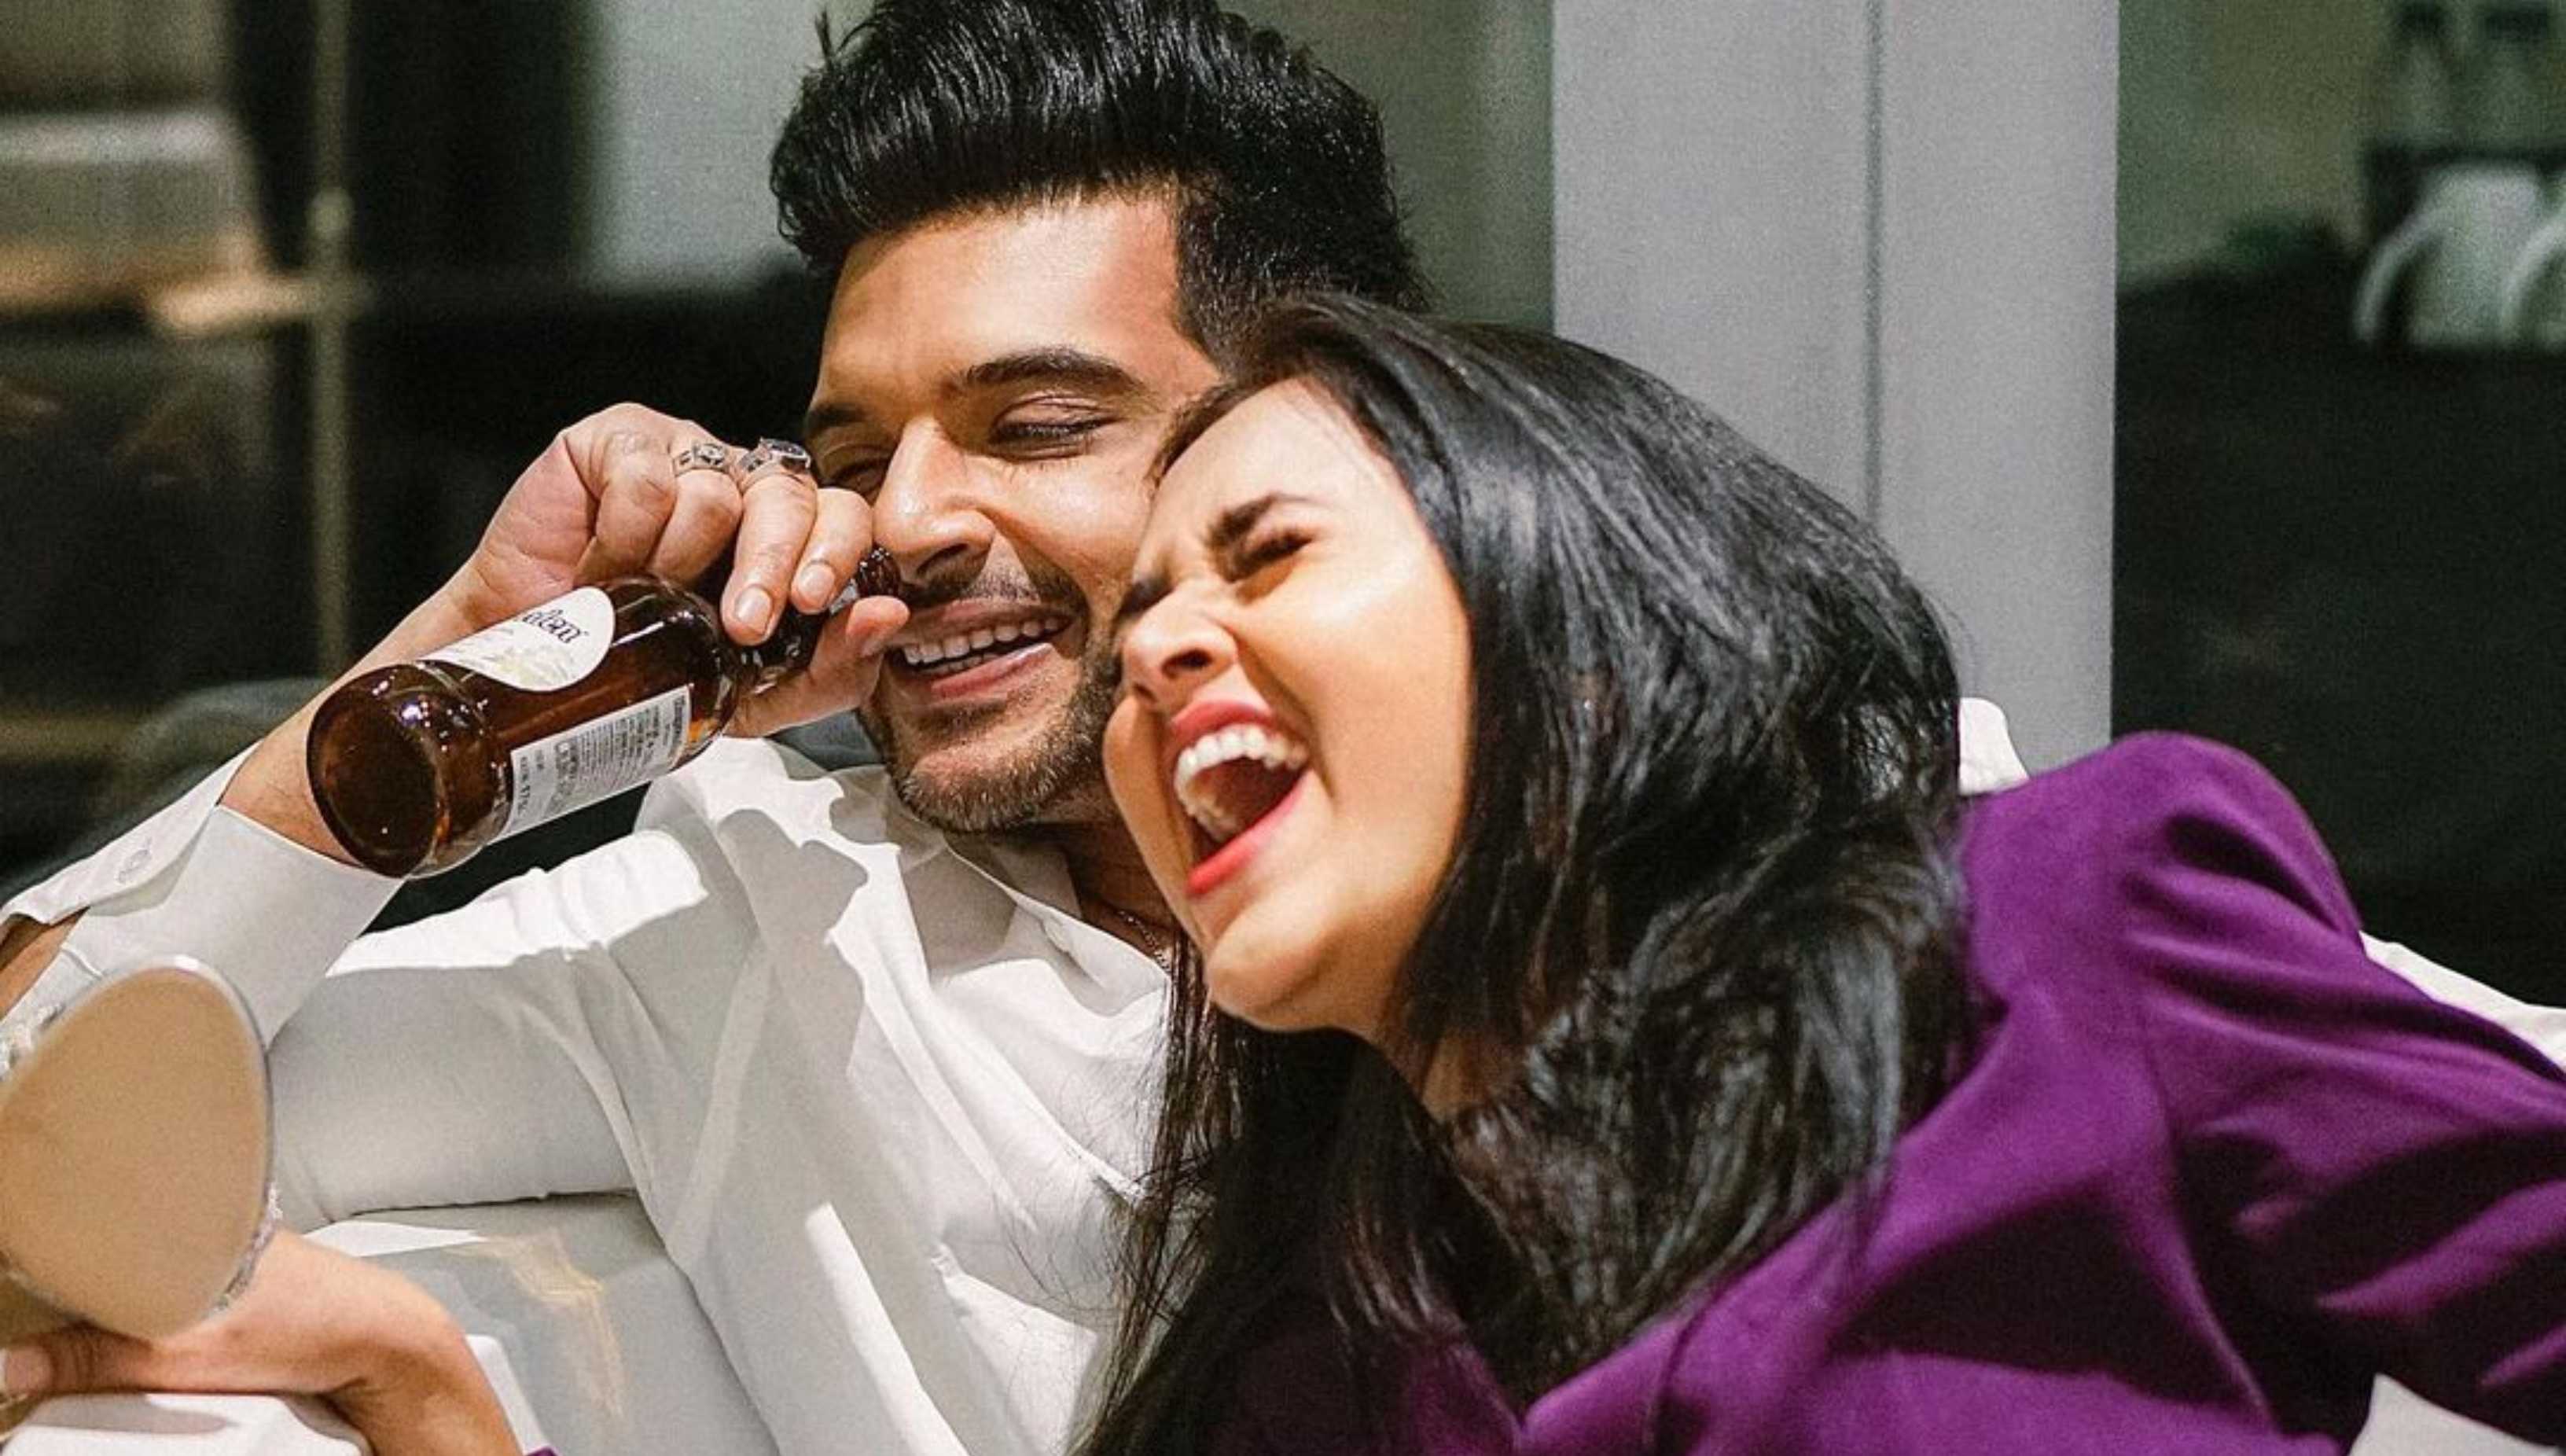 Karan Kundrra and Tejasswi Prakash to come together for Dil Bechara director’s next film? Here’s what we know